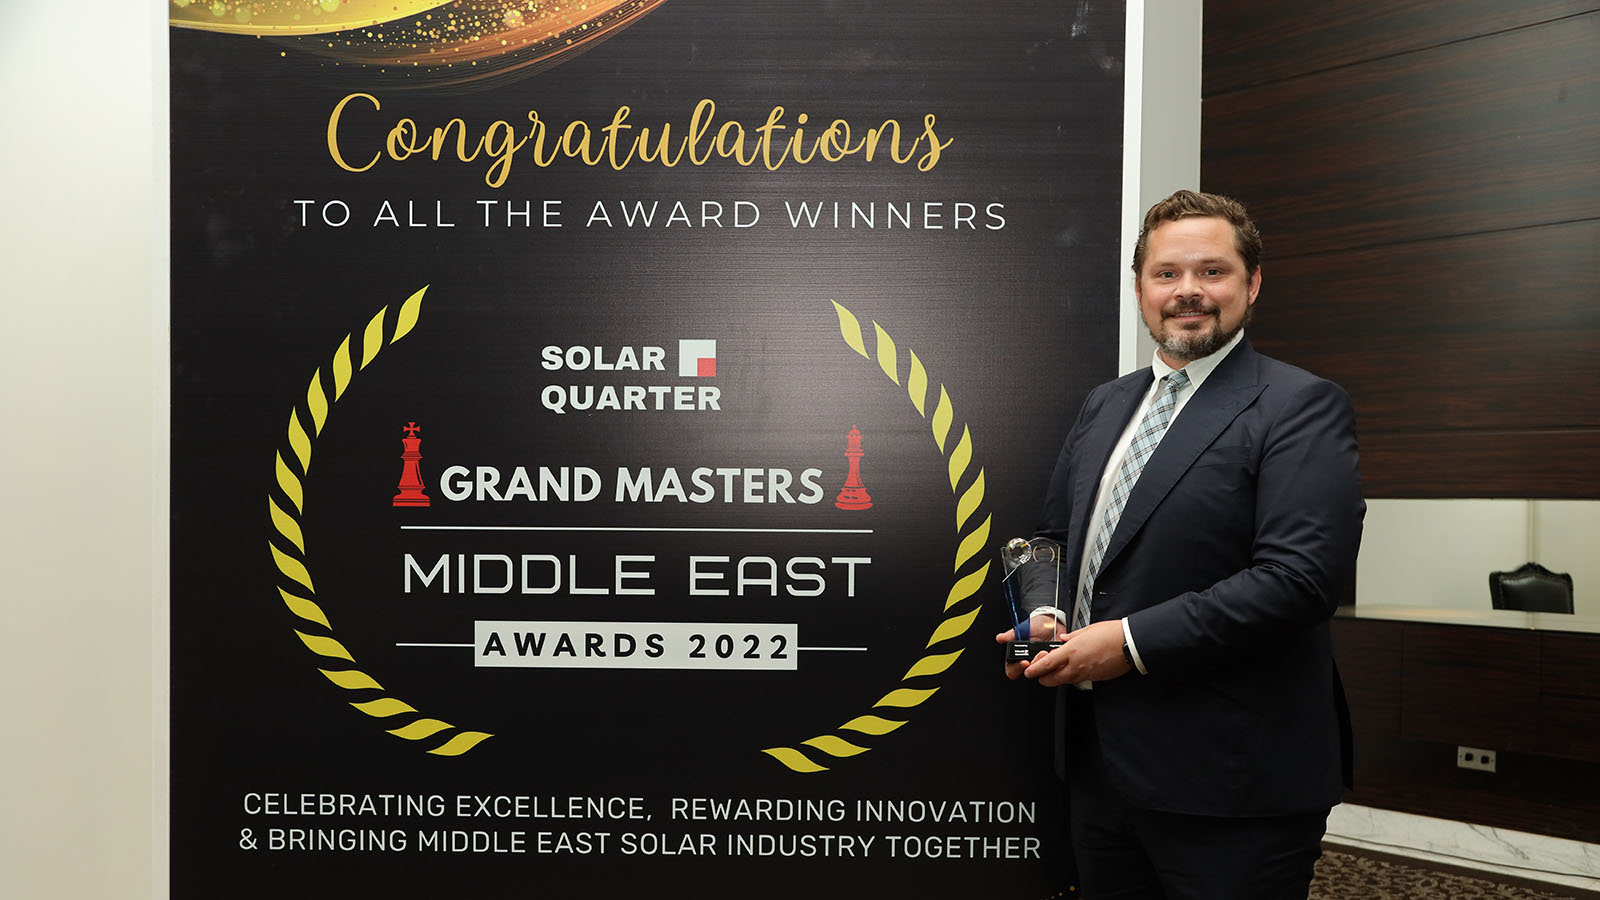 Johnny Kollin, dressed in a dark suit and tie, stands next to a banner, holding a clear award trophy at the Grand Masters Middle East Awards 2022.